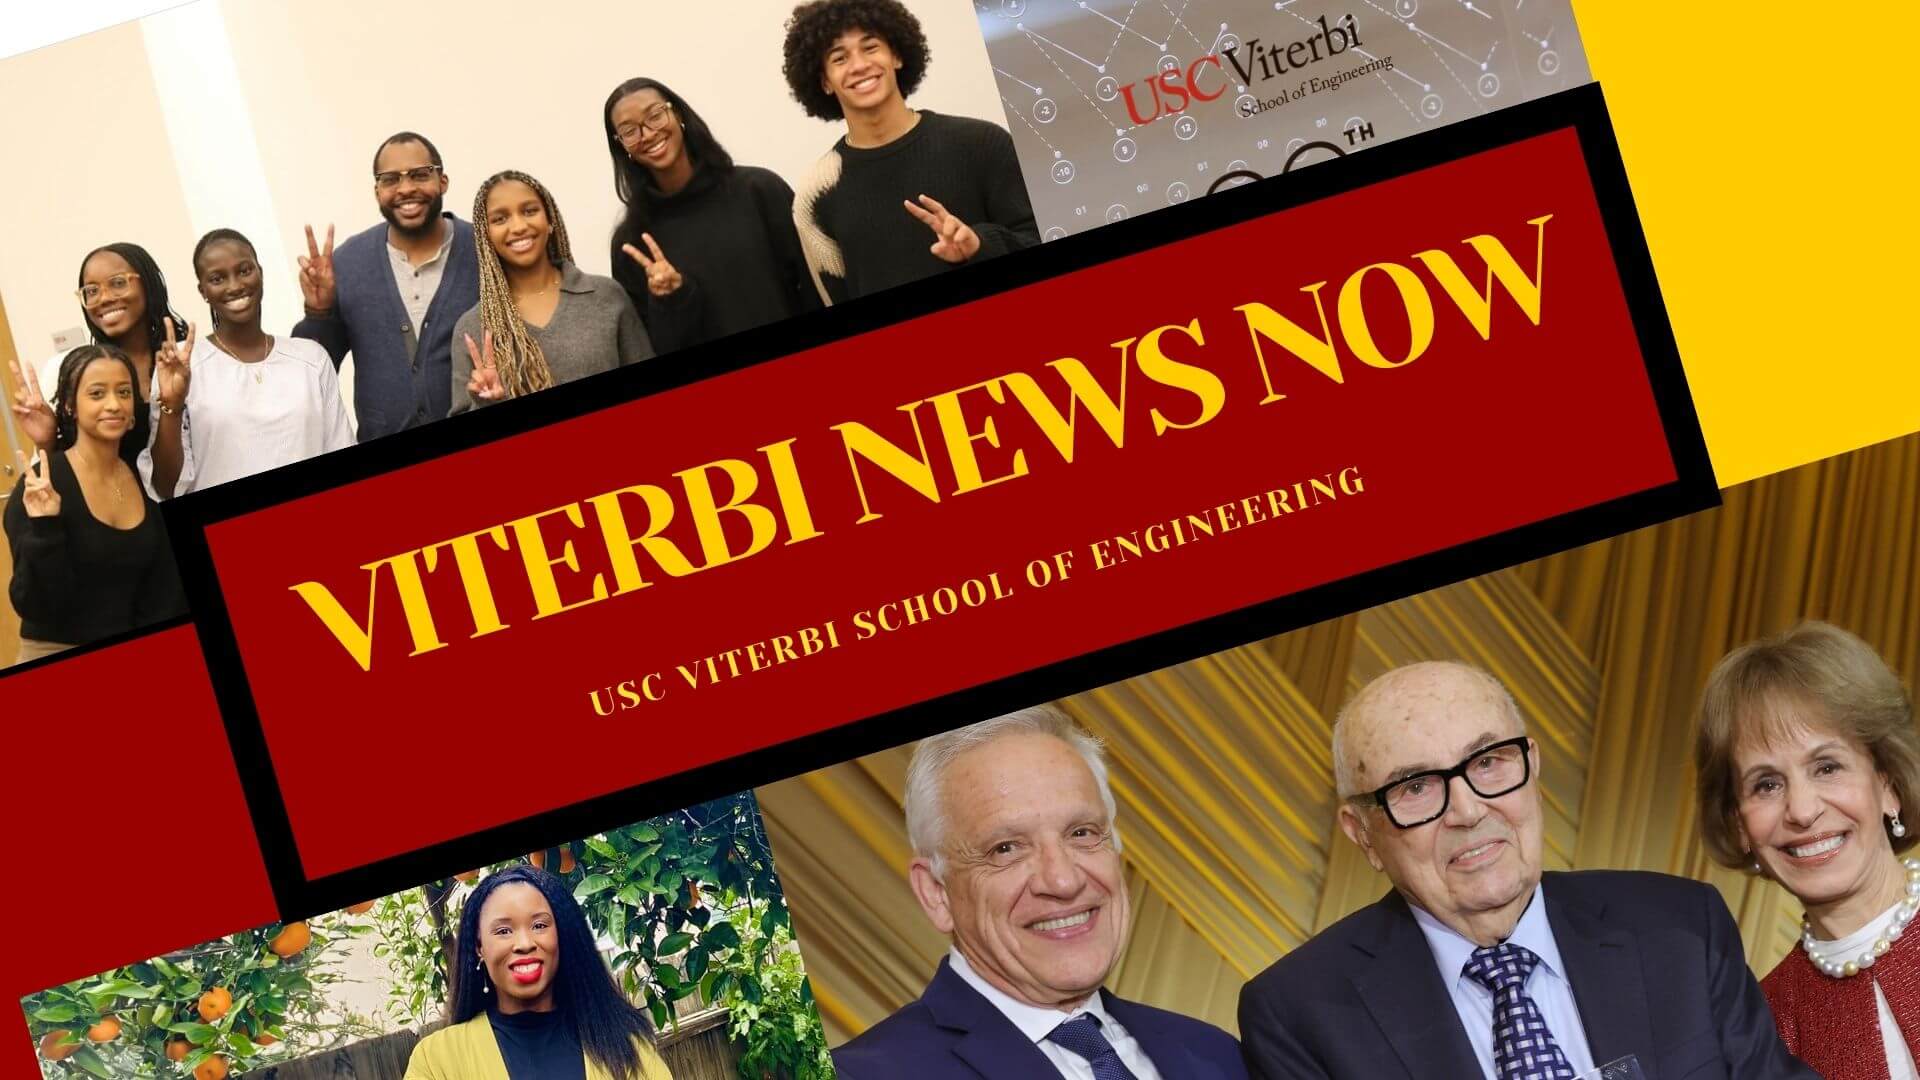 Featured image for “Viterbi News Now- Episode 65”